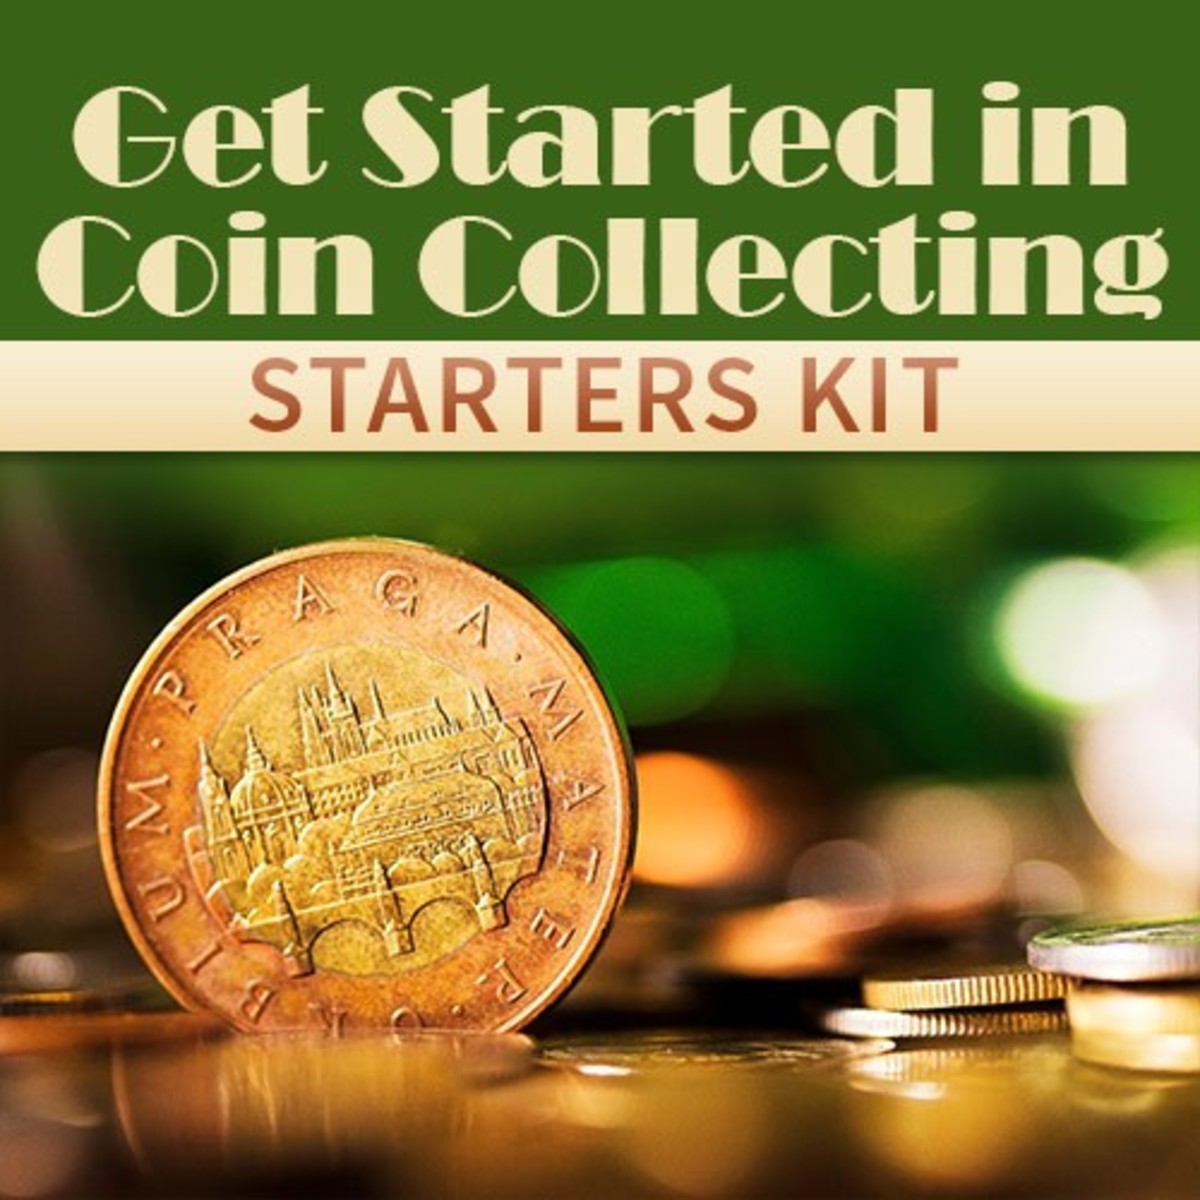 Do you know someone that’s interested in starting a coin collection?